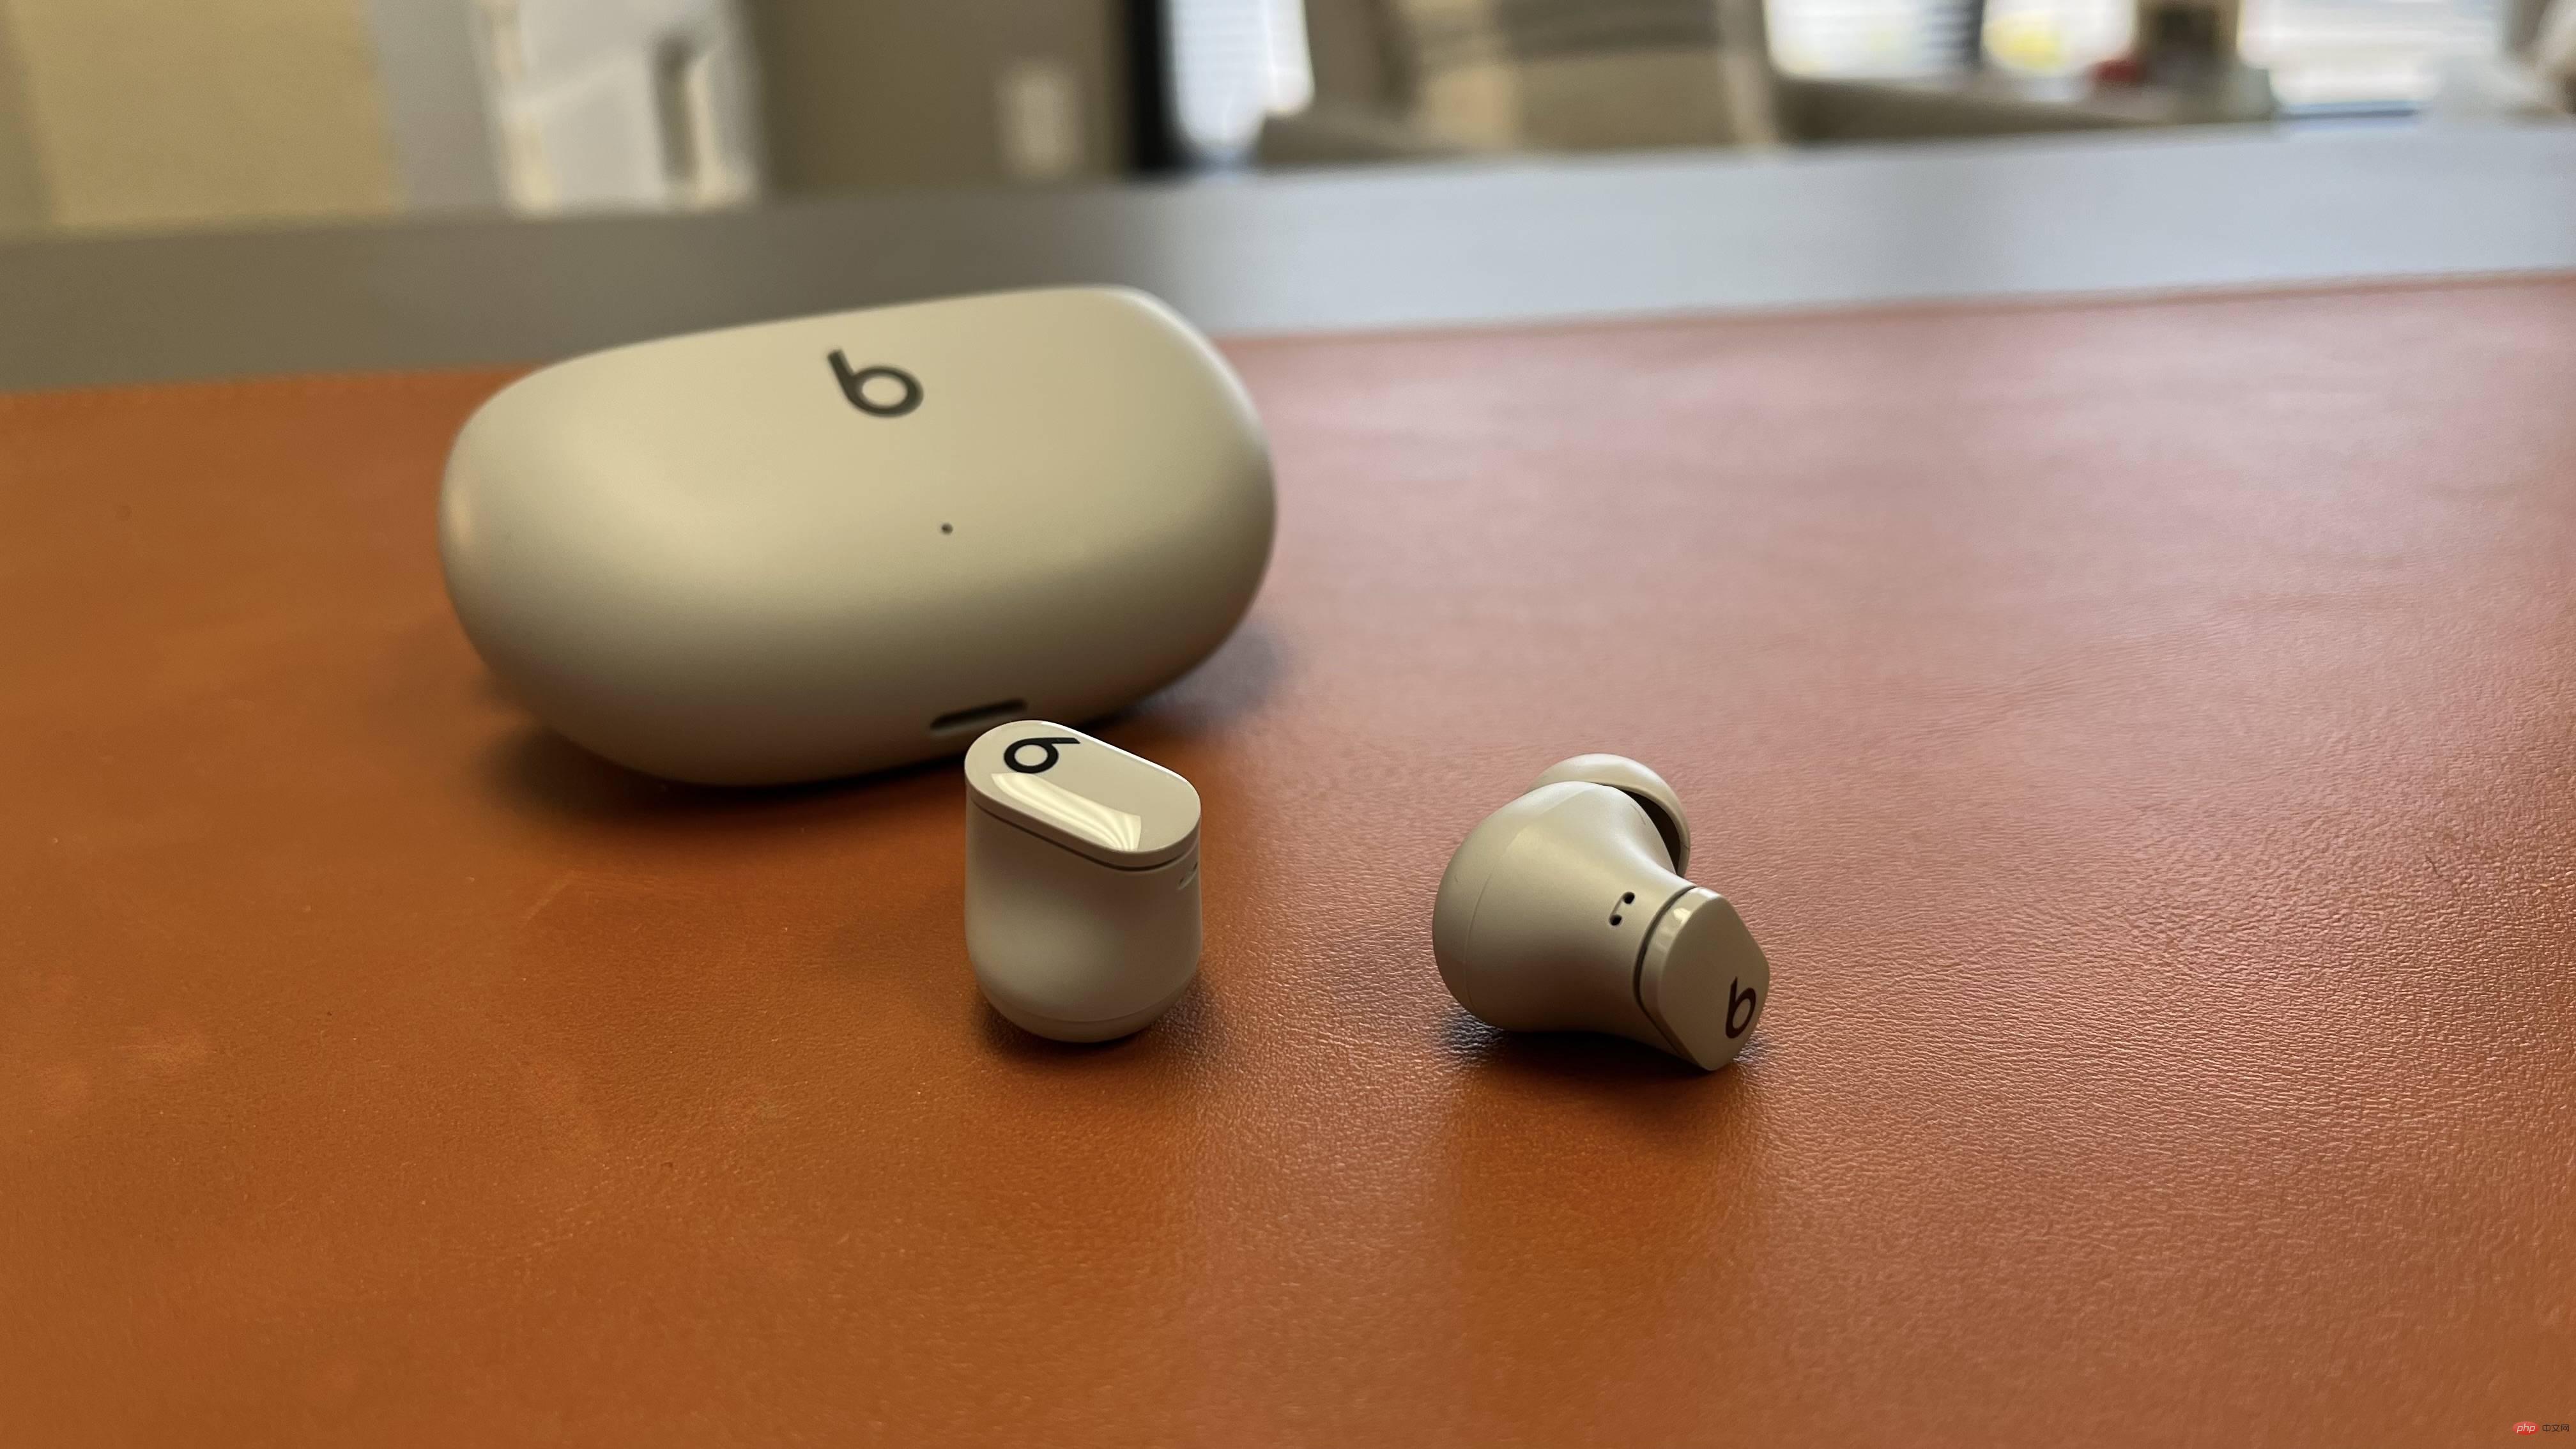 Studio Buds, the “best-selling” Beats product yet, now available in three new colors